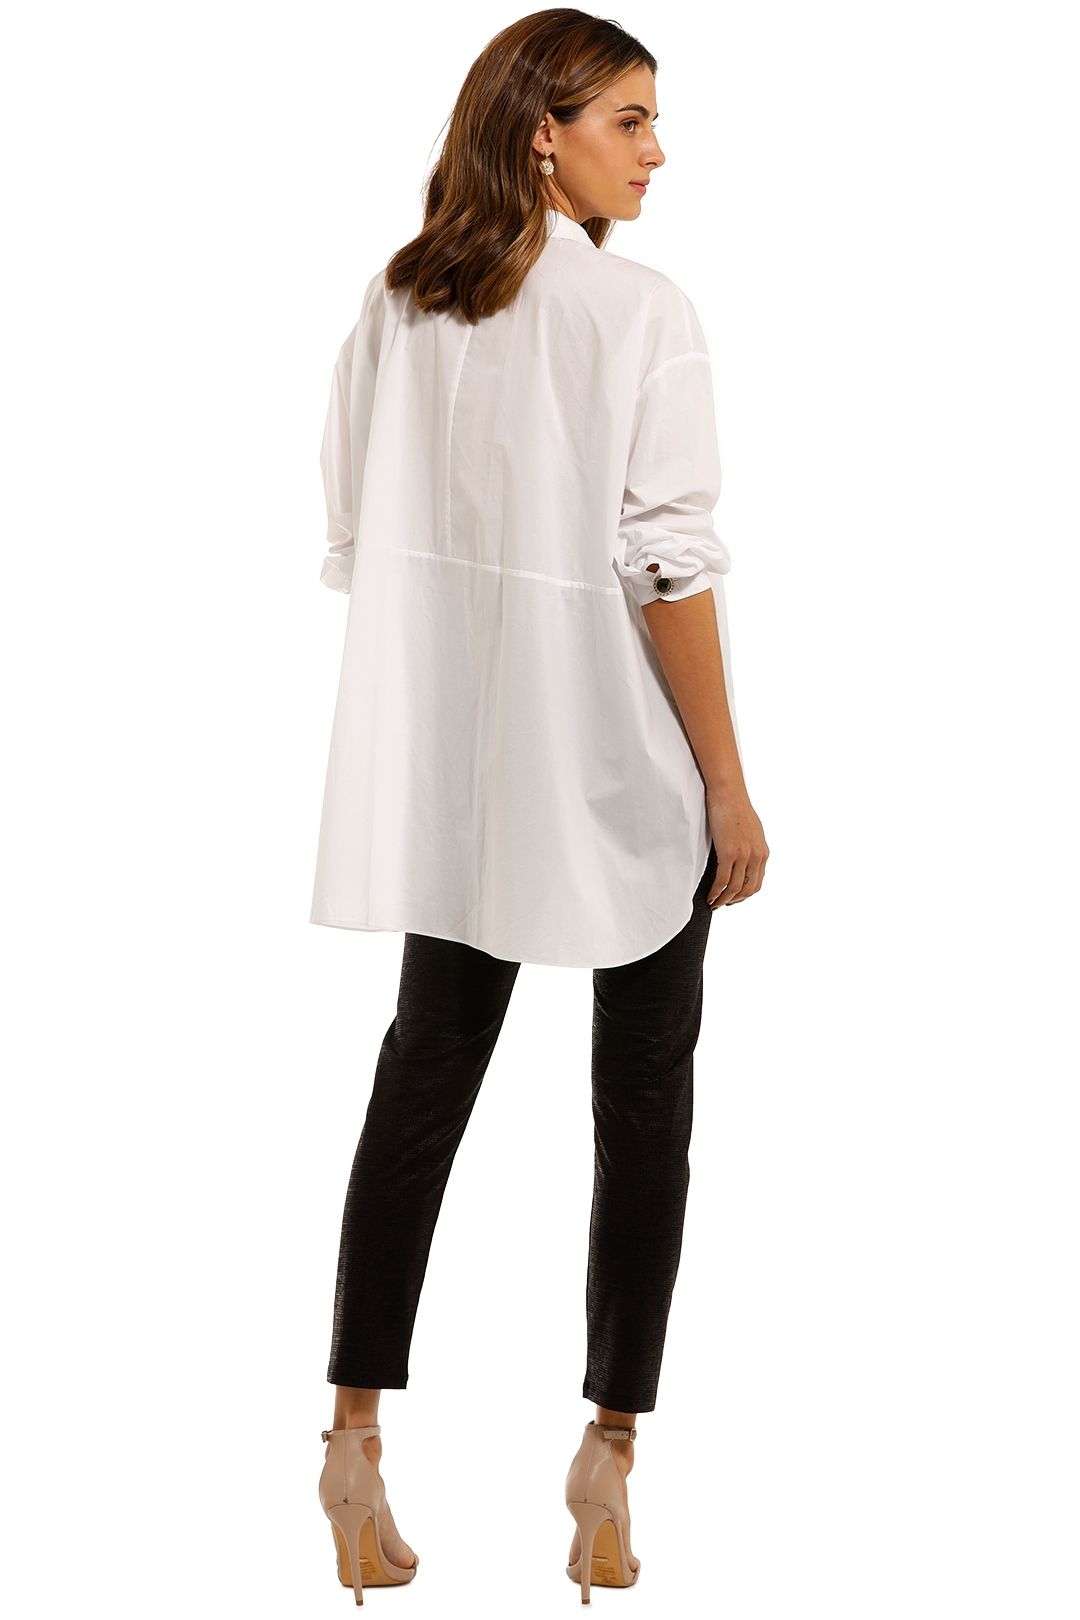 Cooper by Trelise Cooper Button Me Up Shirt button